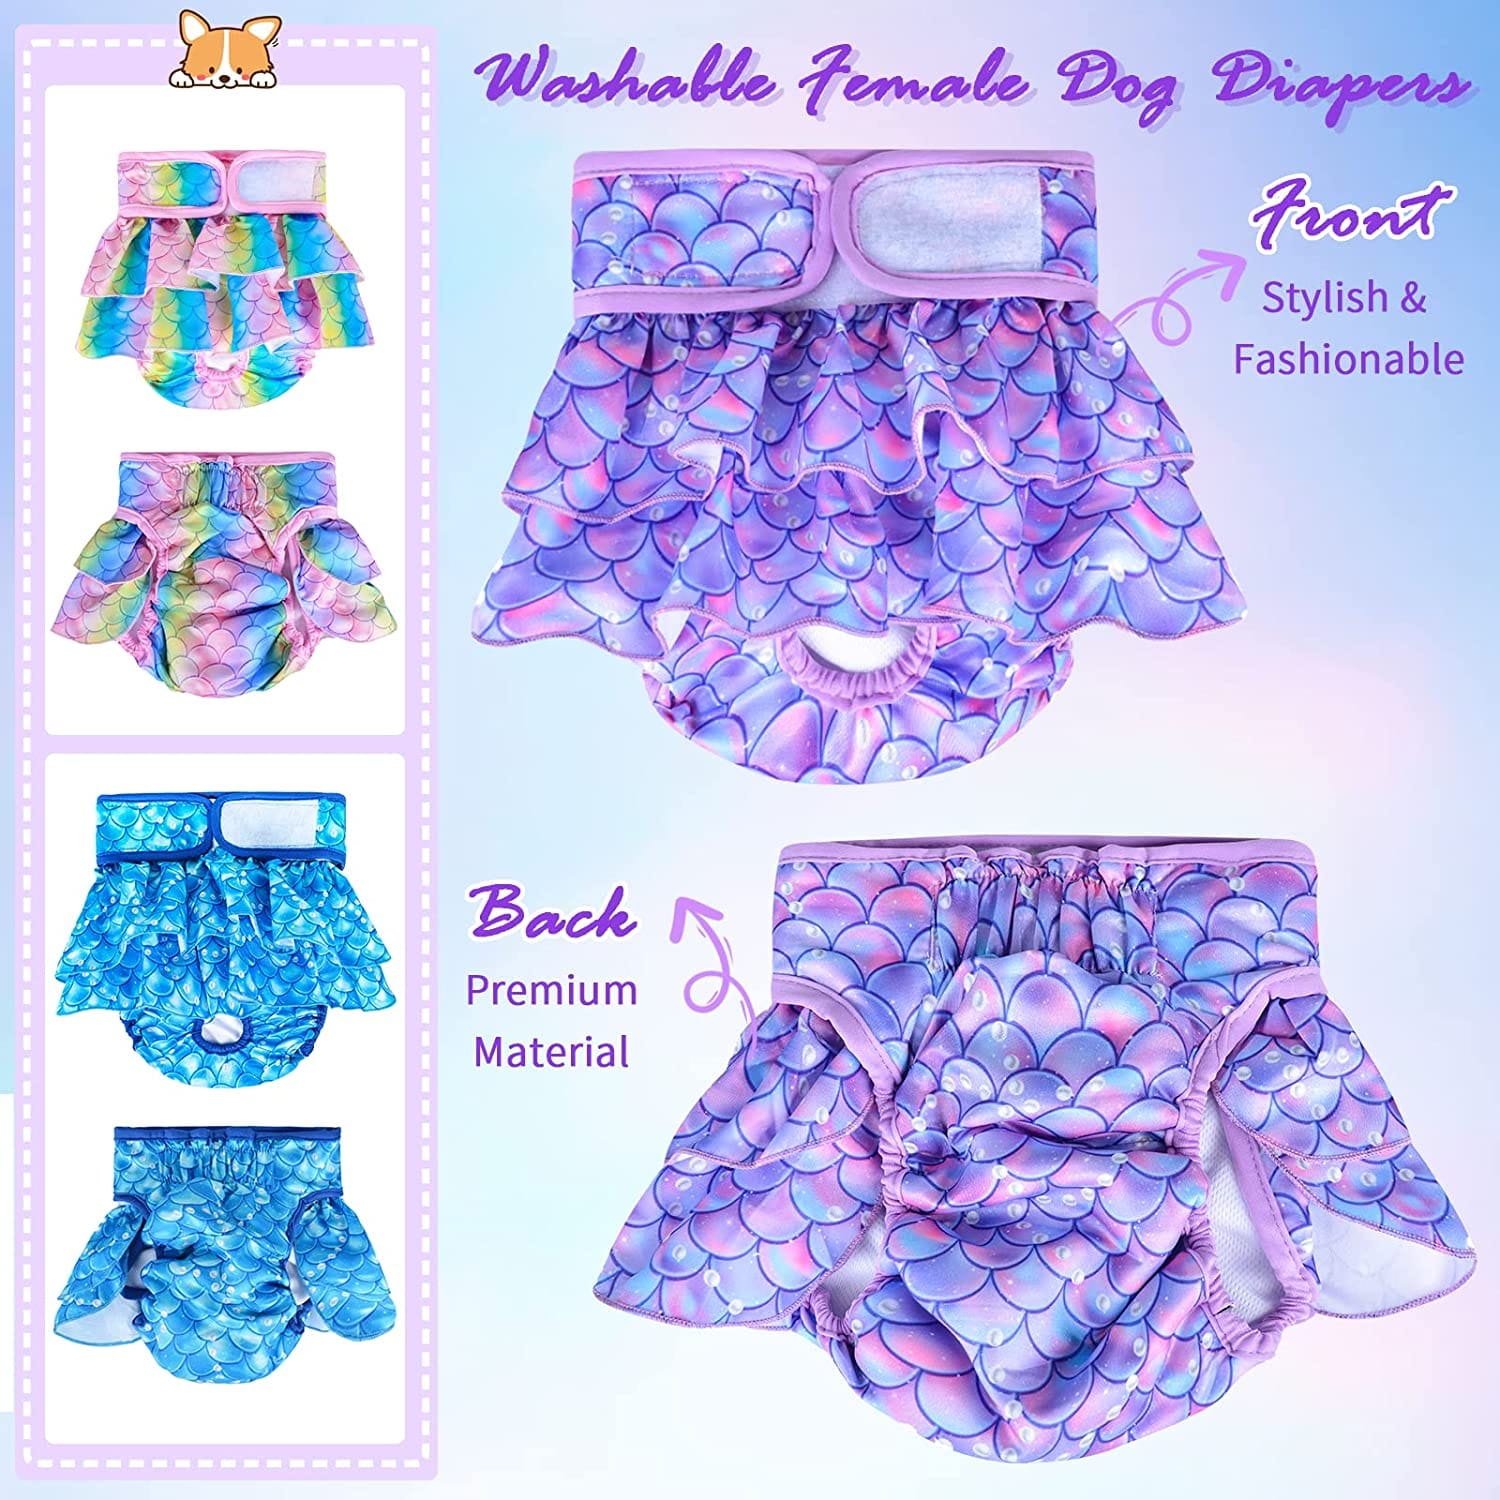 KUTKUT Female Dog Diapers, No Leak Washable Female Dog Diapers, Highly Absorbent Diapers for Dogs Female in Heat, Incontinence, Excitable Urination or Period Reusable Dog Skirt Diapers (Multi